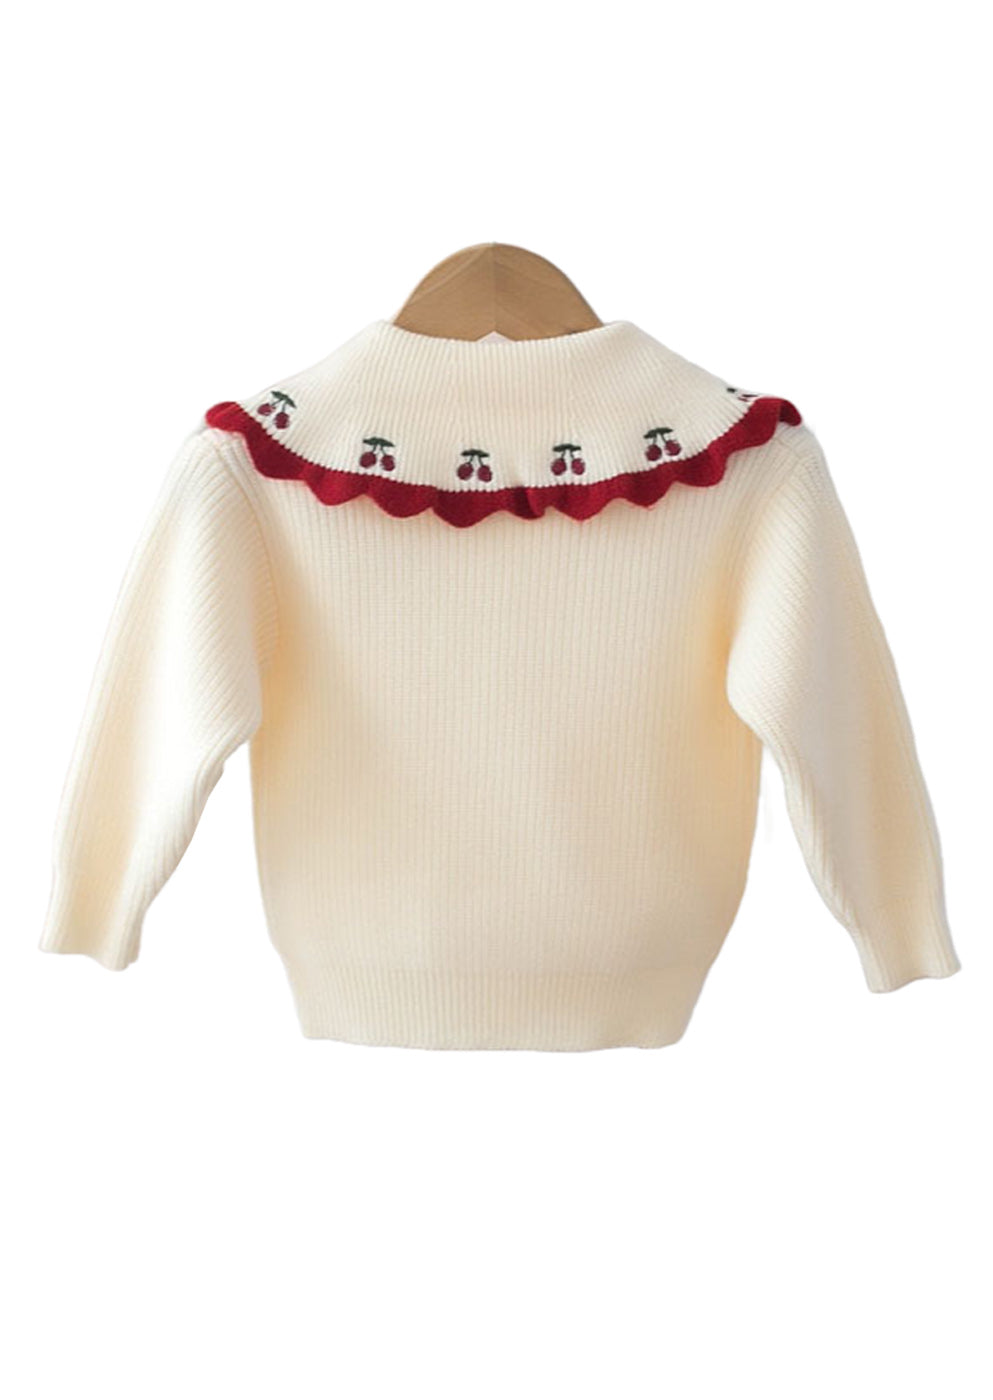 GIRLS - Cream/Red Girls Embroidered Collar Sweater - Hannah Rose Vintage Boutique